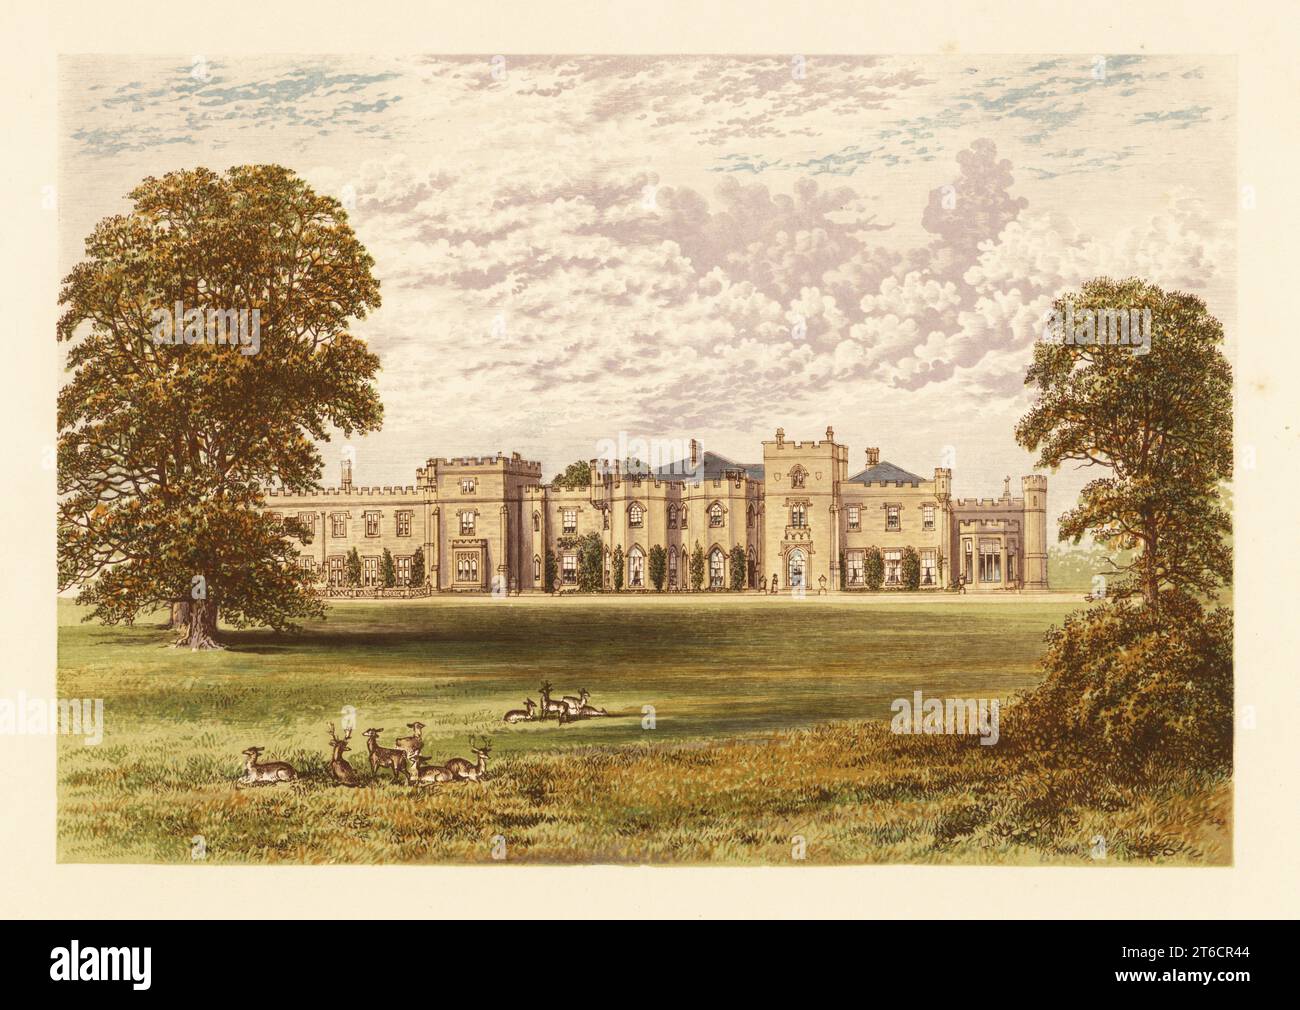 Panshanger Park, Hertfordshire, England. Gothic-Revival style house built by Samuel Wyatt and William Atkinson in 1806 with gardens landscaped by Humphry Repton for Peter Clavering-Cowper, 5th Earl Cowper. Colour woodblock by Benjamin Fawcett in the Baxter process of an illustration by Alexander Francis Lydon from Reverend Francis Orpen Morriss Picturesque Views of the Seats of Noblemen and Gentlemen of Great Britain and Ireland, William Mackenzie, London, 1880. Stock Photo